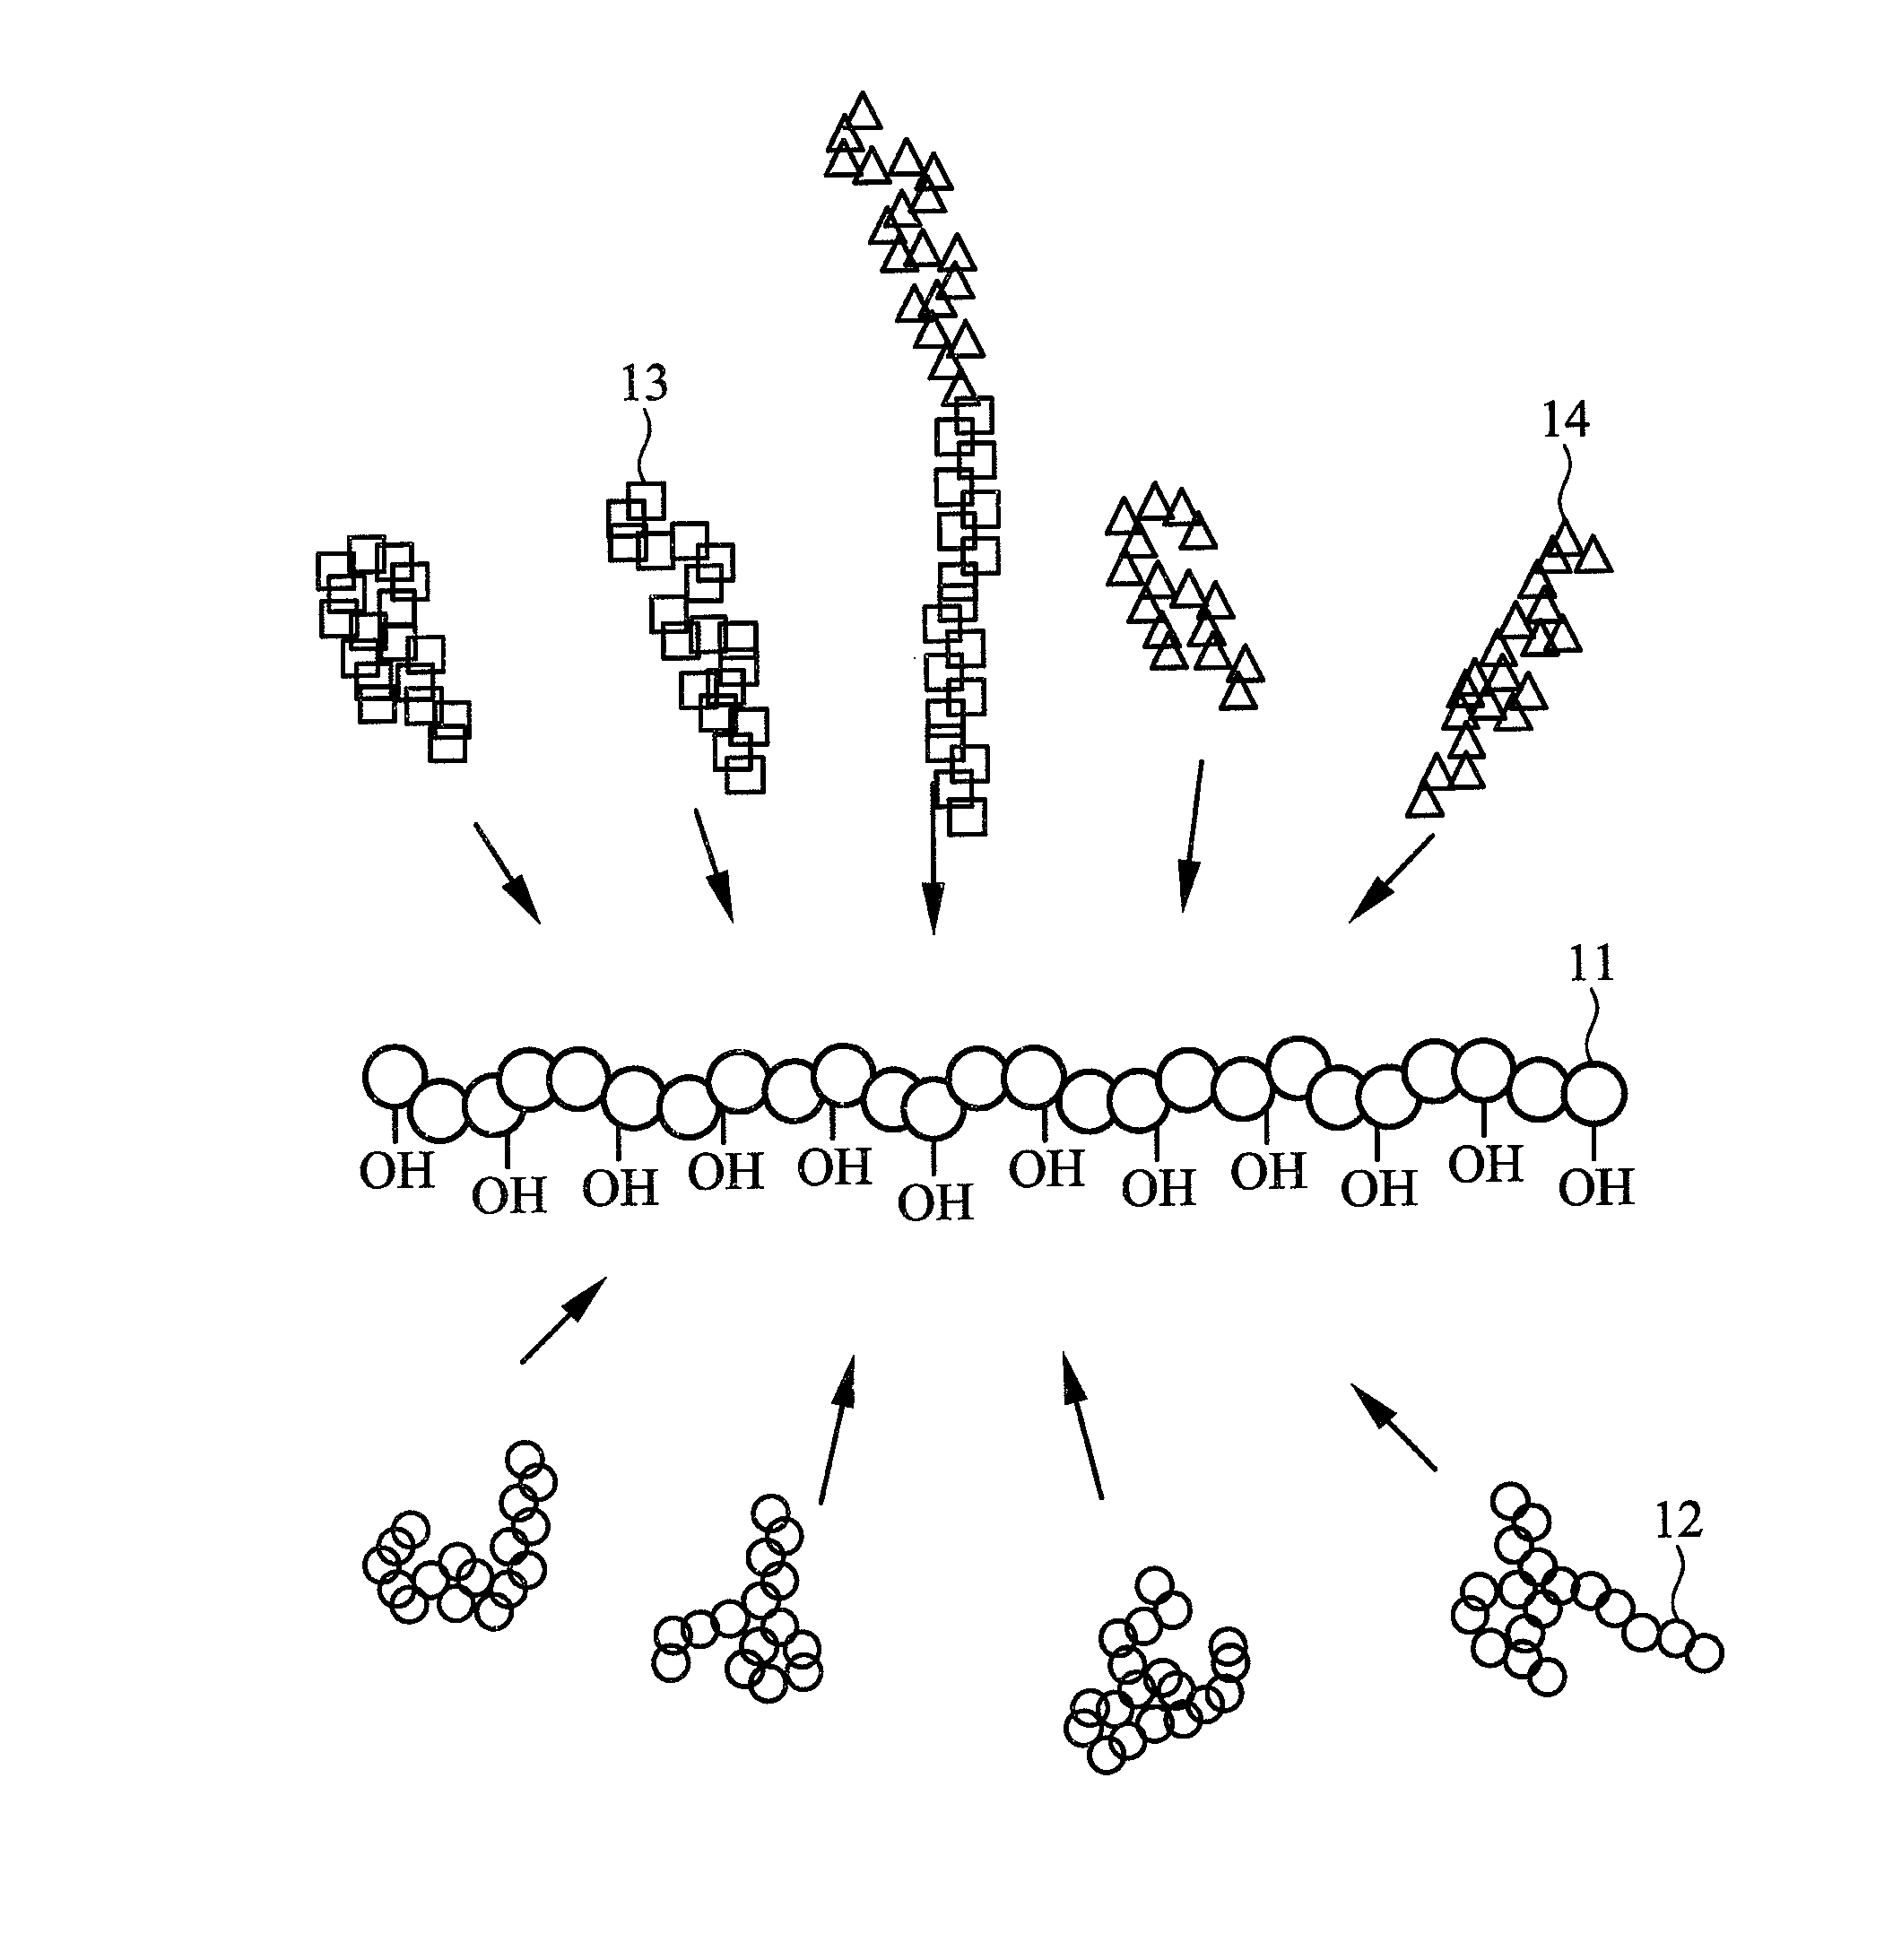 Brush polymer and medical use thereof